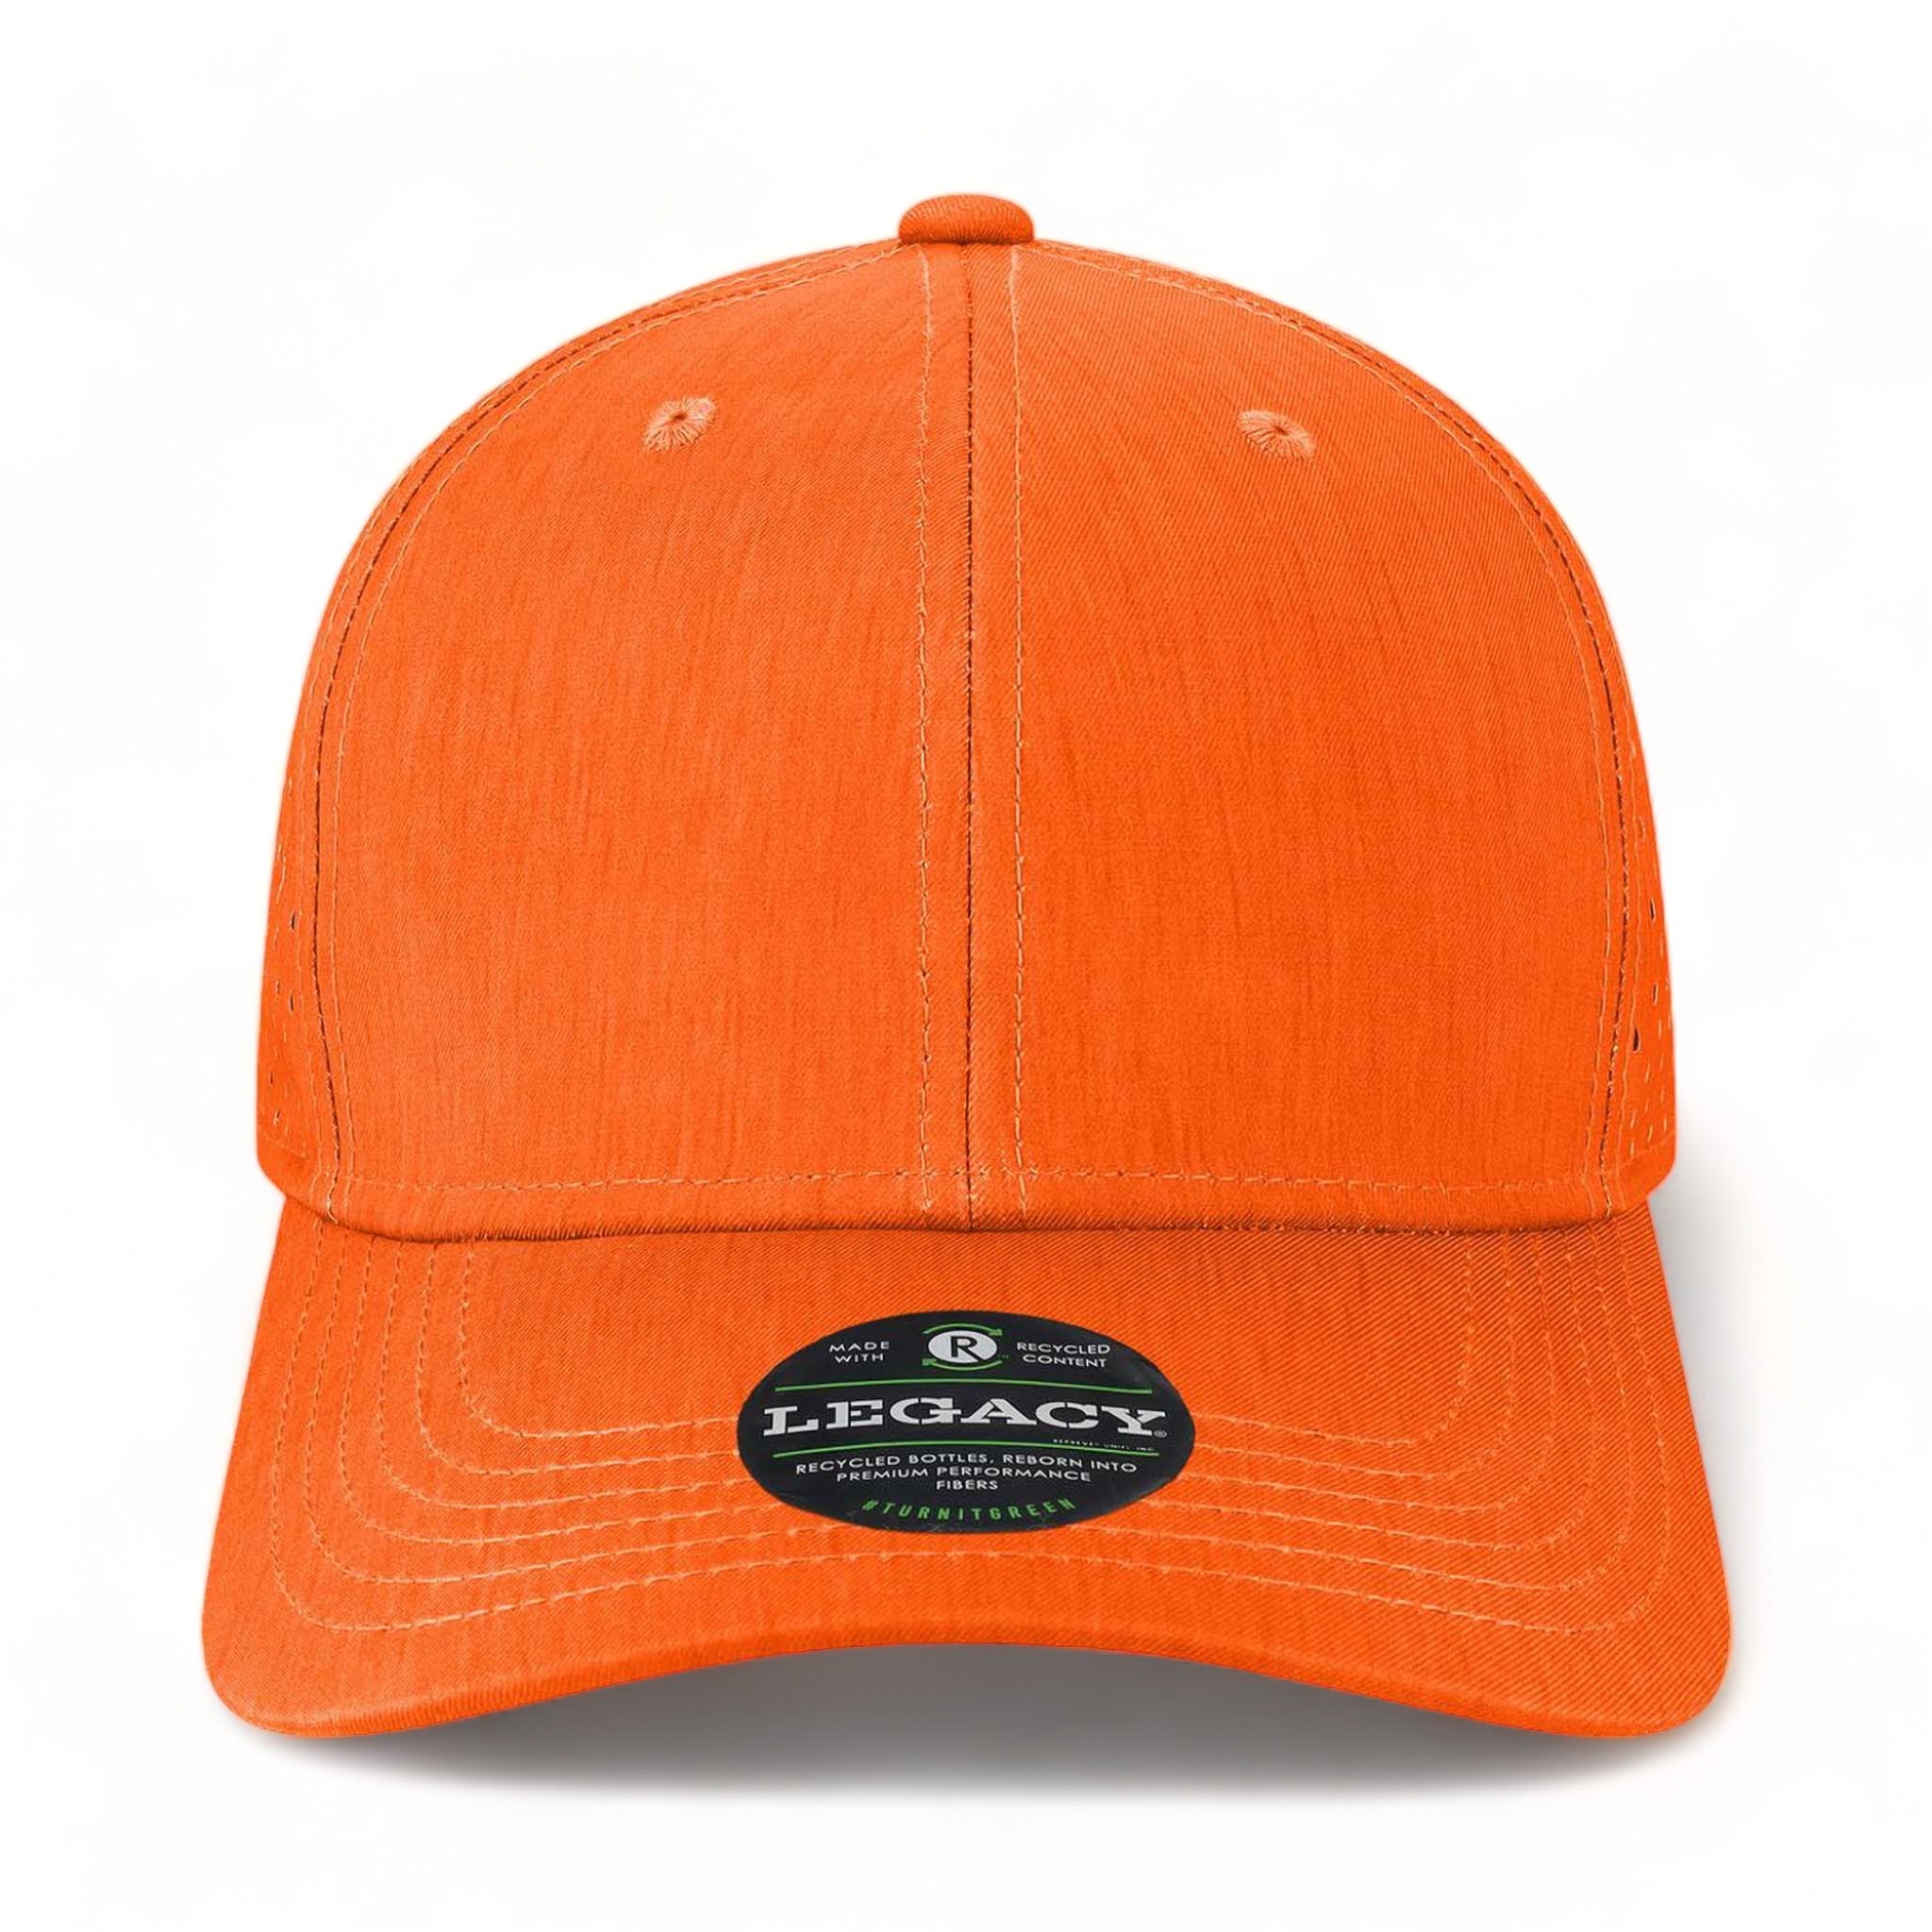 Front view of LEGACY REMPA custom hat in eco orange